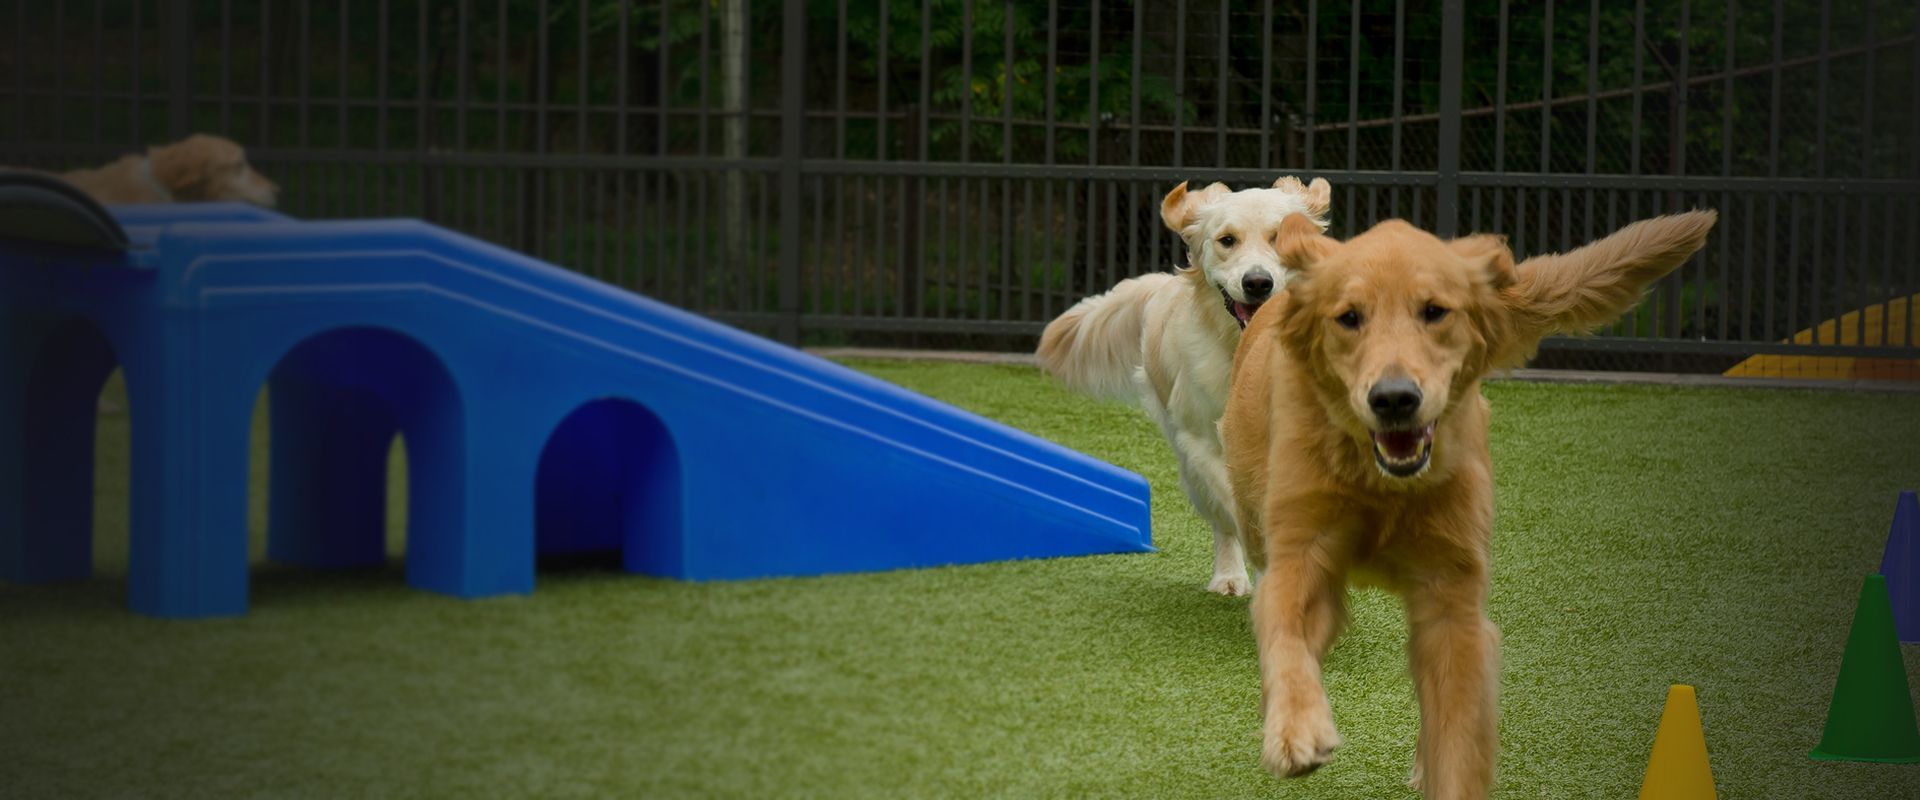 golden retriever dogs playing at rivermist pet lodge playground